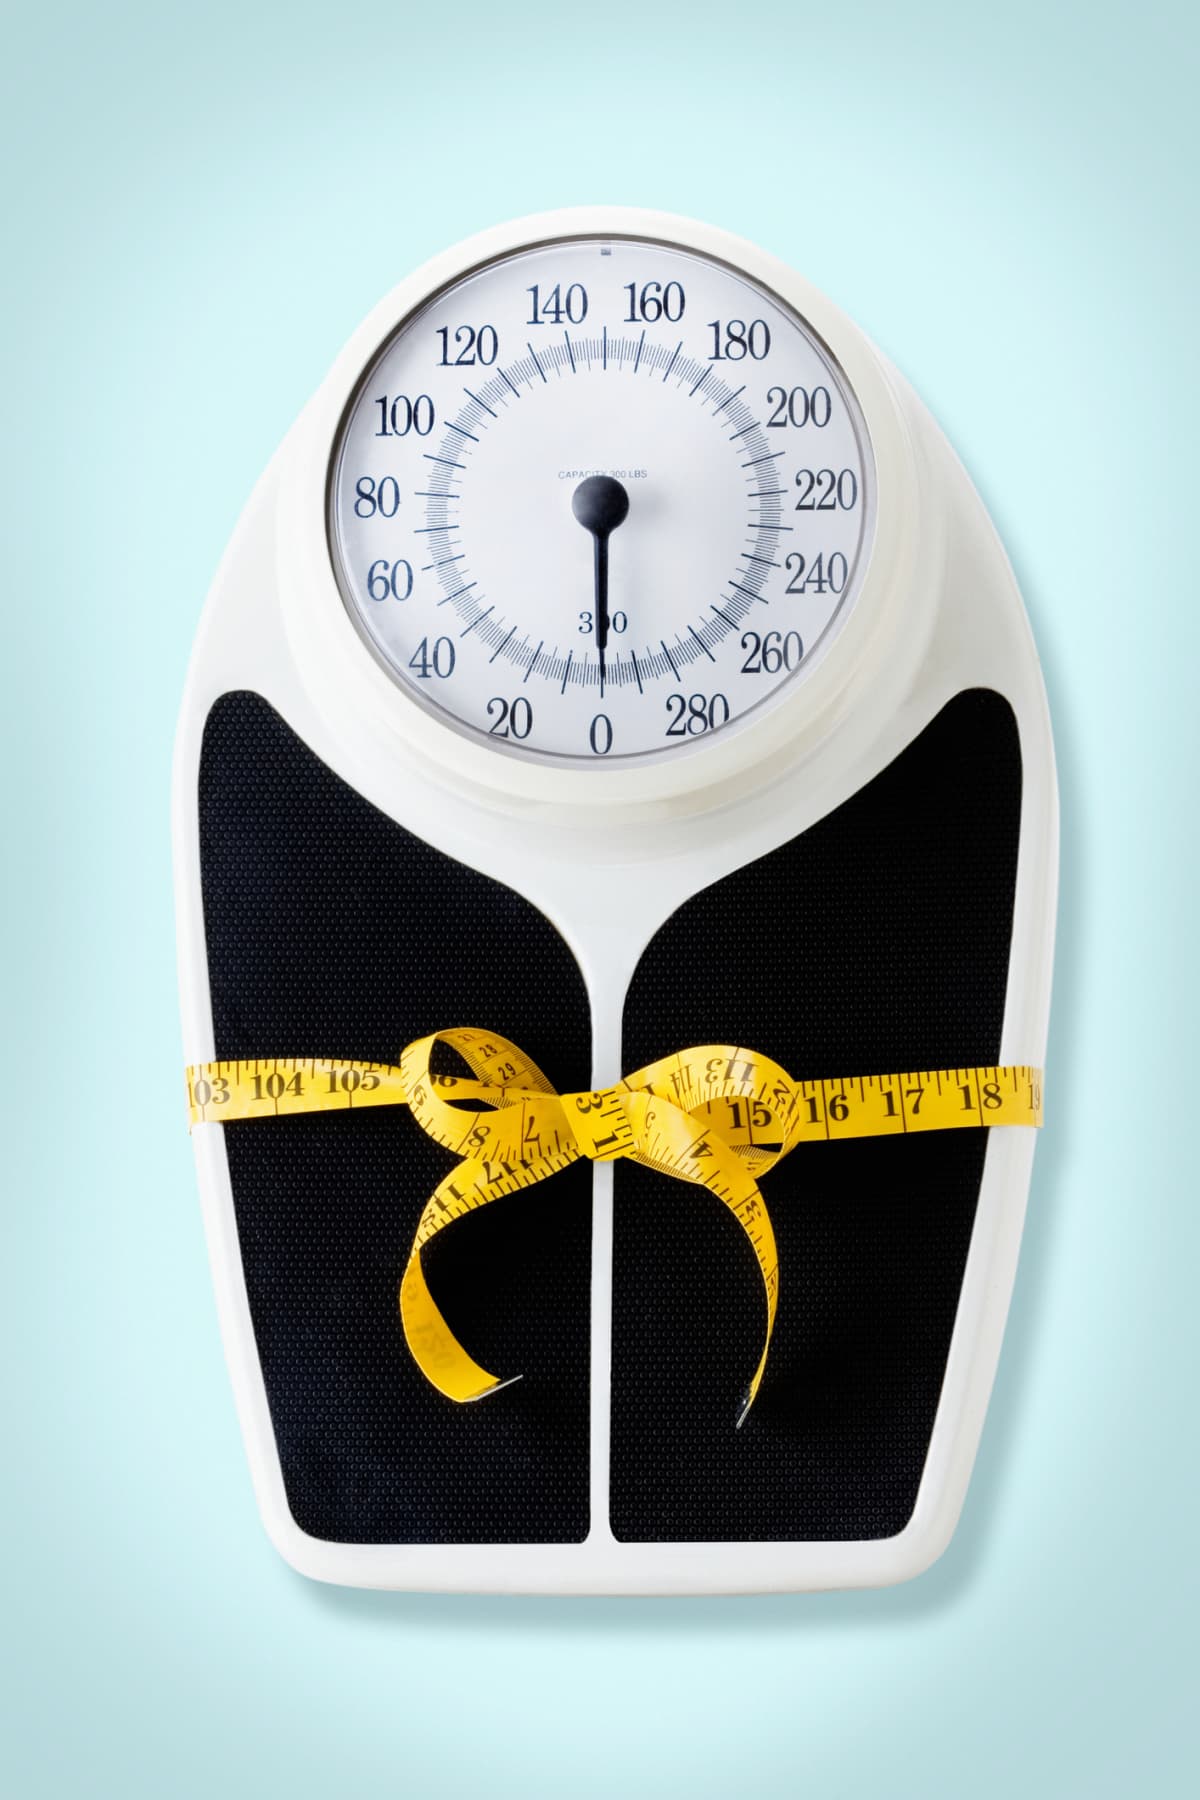 A scale with a tape measure on it